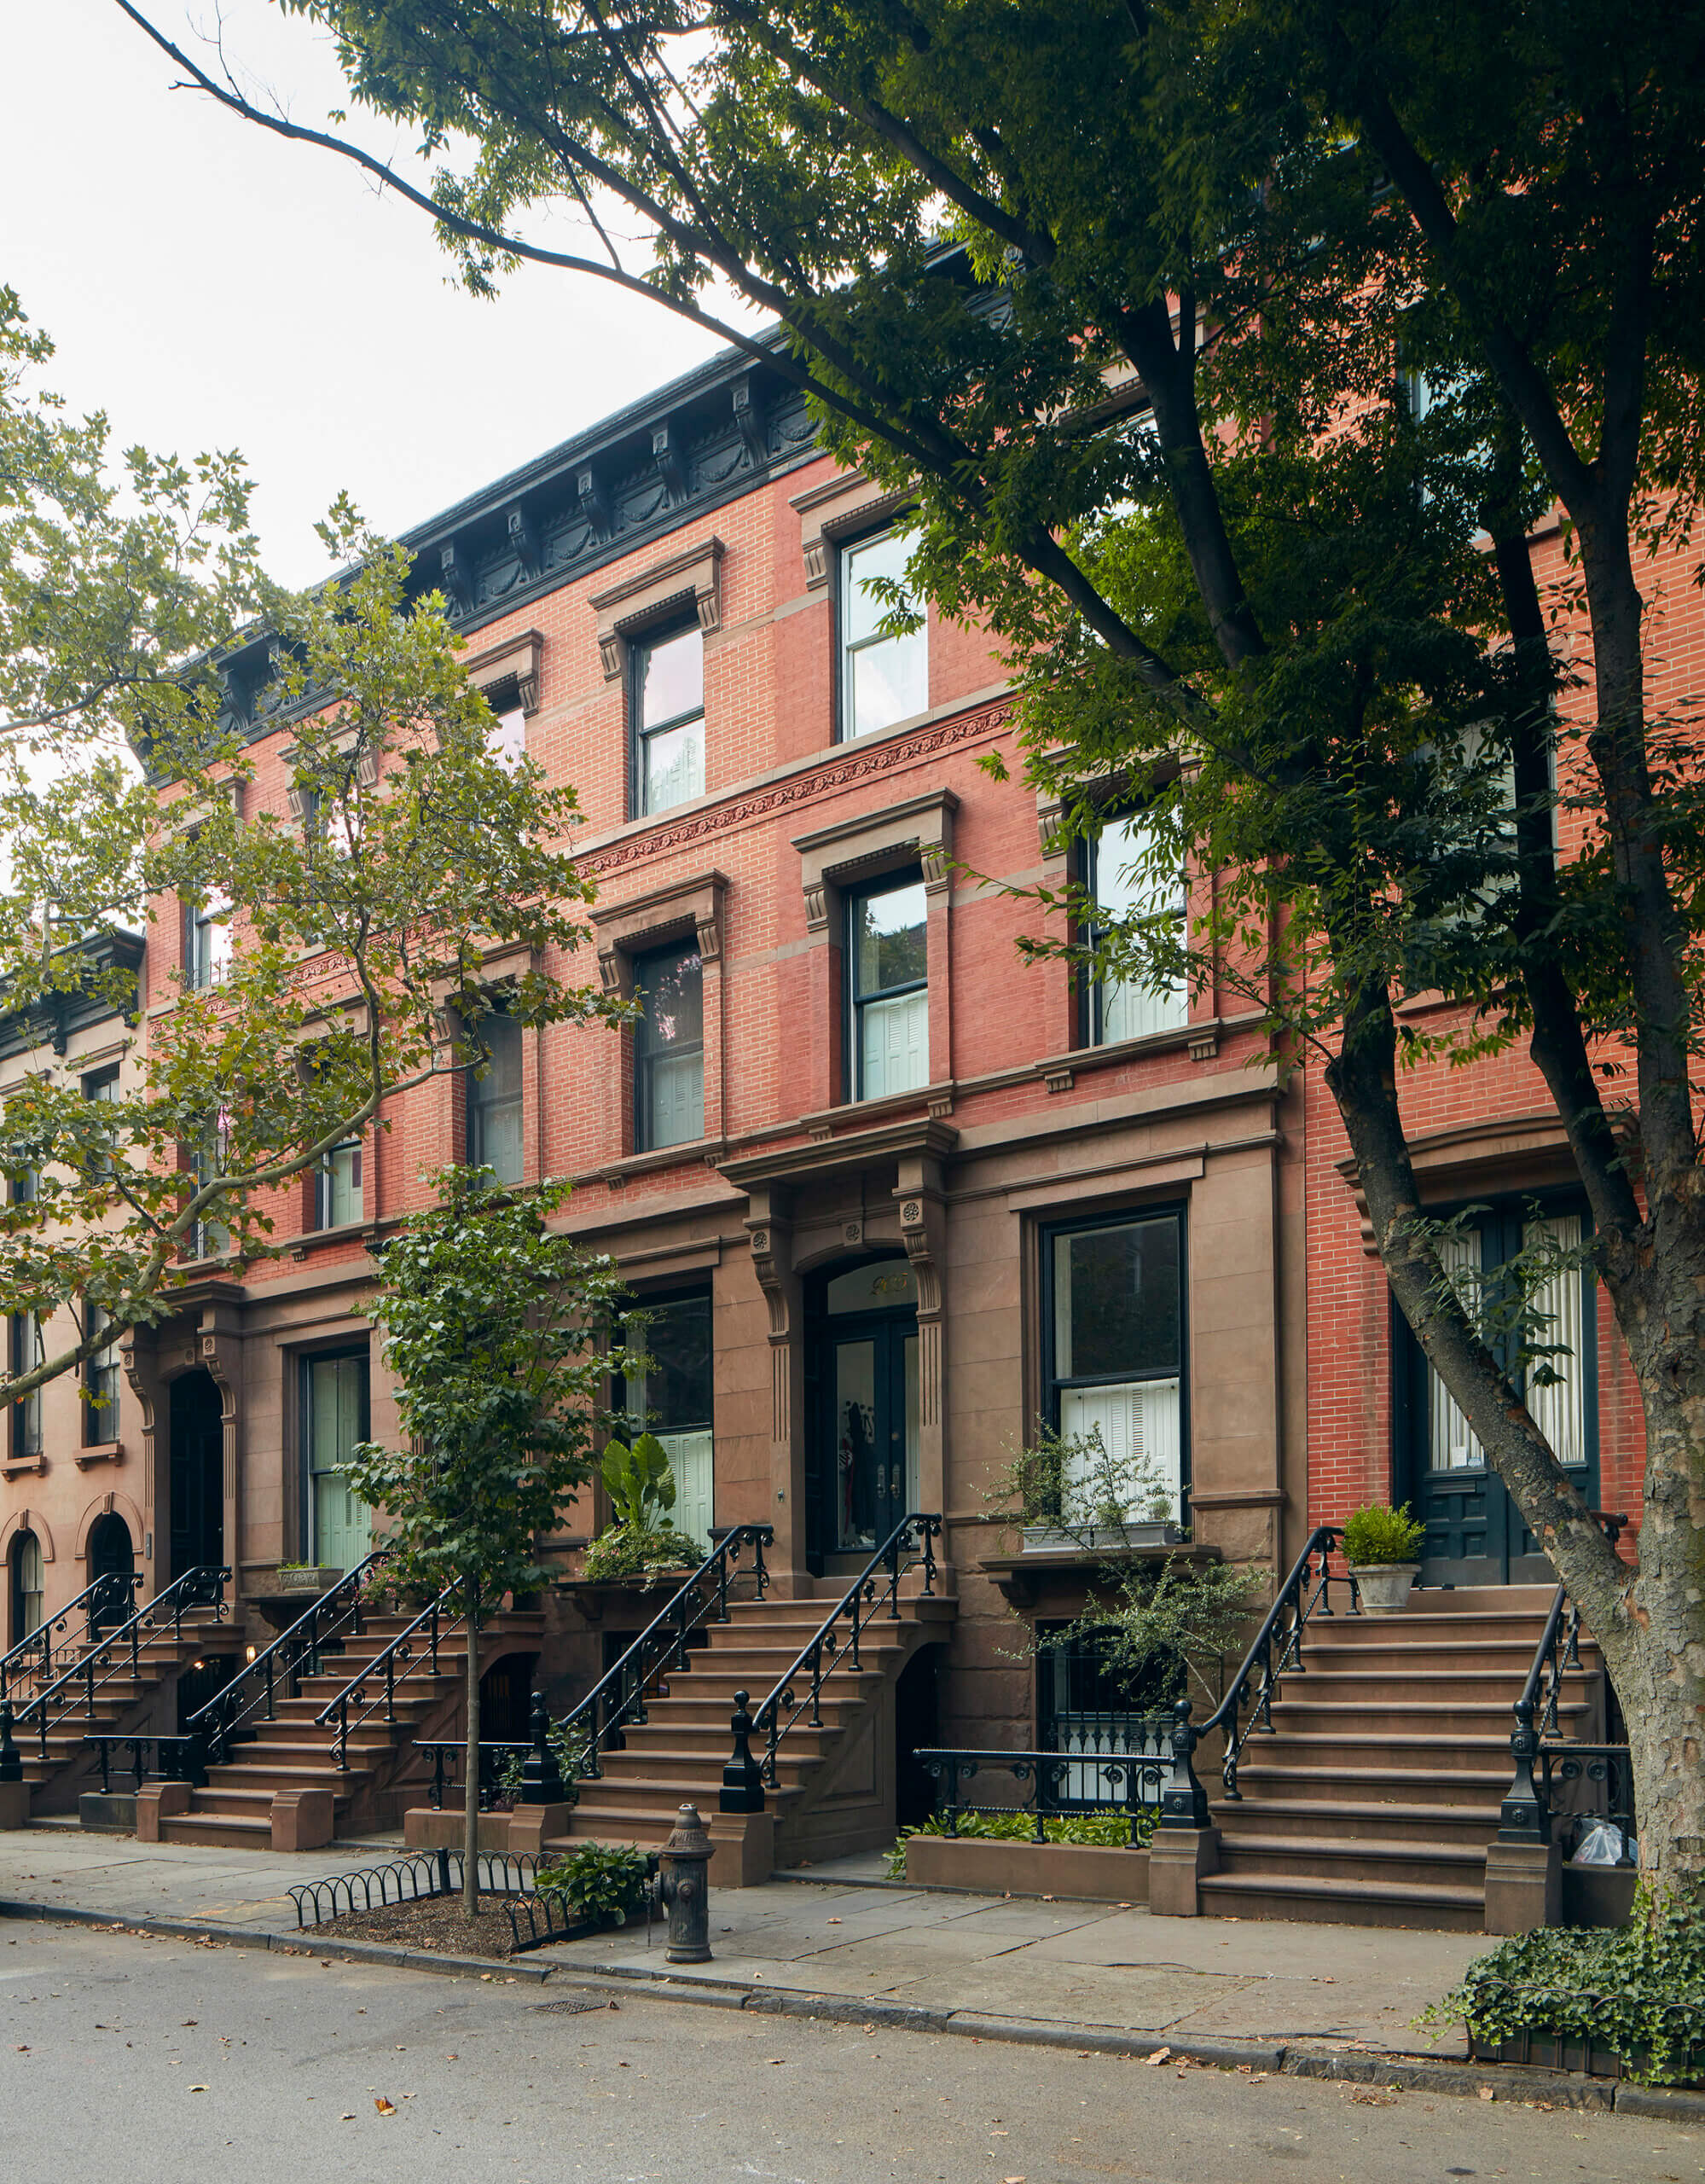 EXTERIOR of the brick and brownstone row house